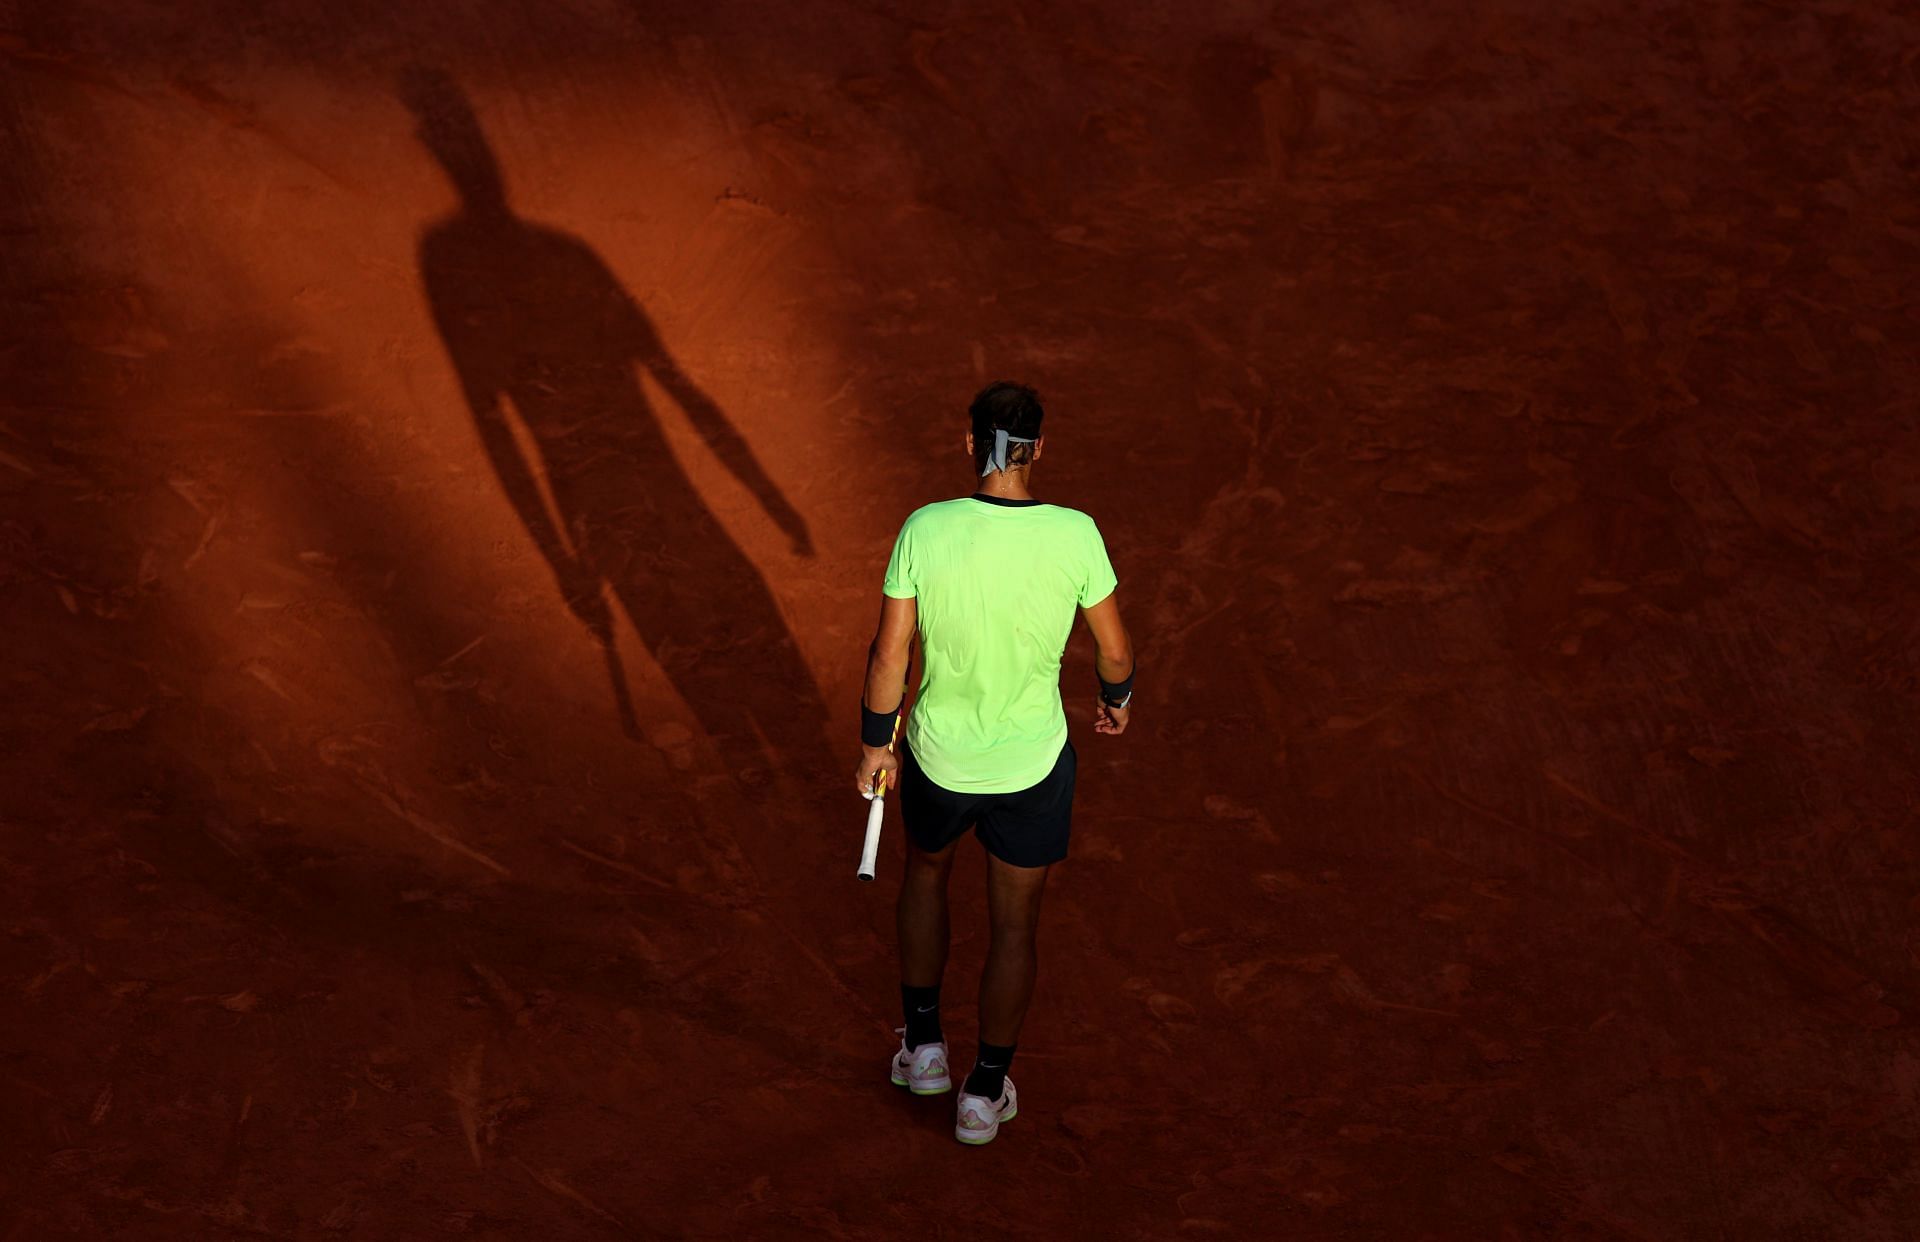 Nadal in action against Novak Djokovic at the 2021 French Open